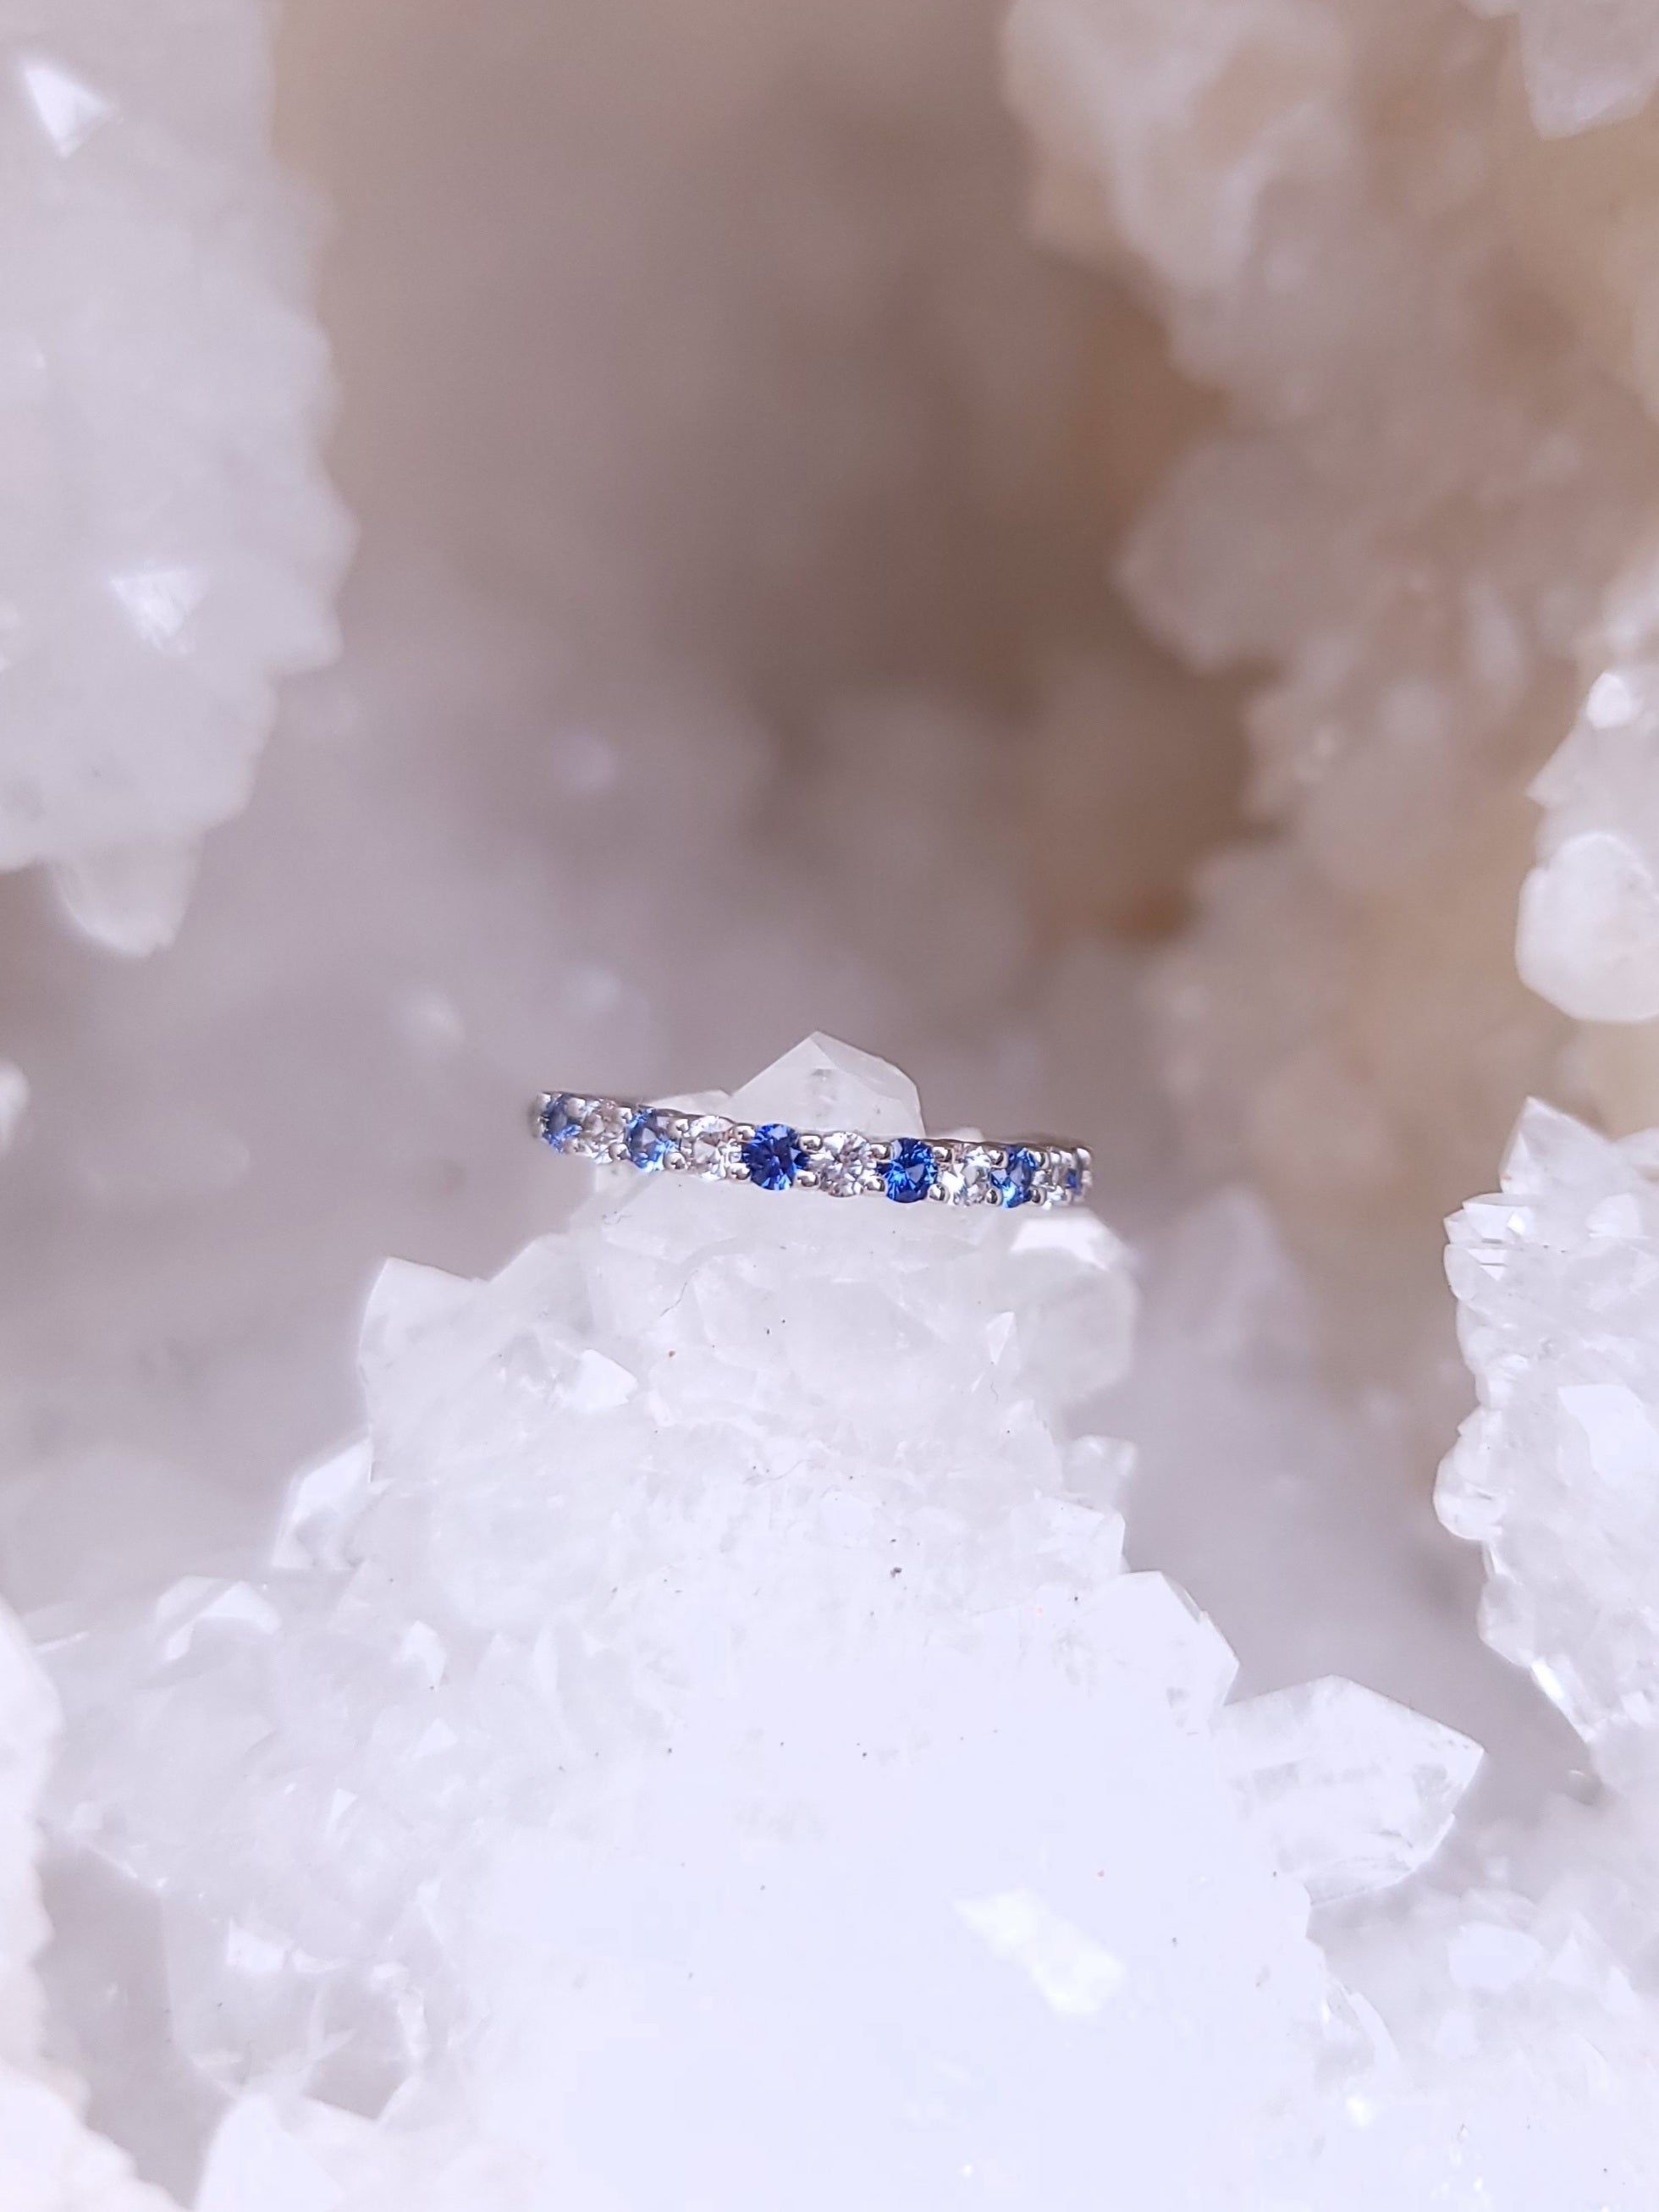 Ring - Sapphires .37 CTW Ombré Blue and White Alternating Round Cut in 14K White Gold